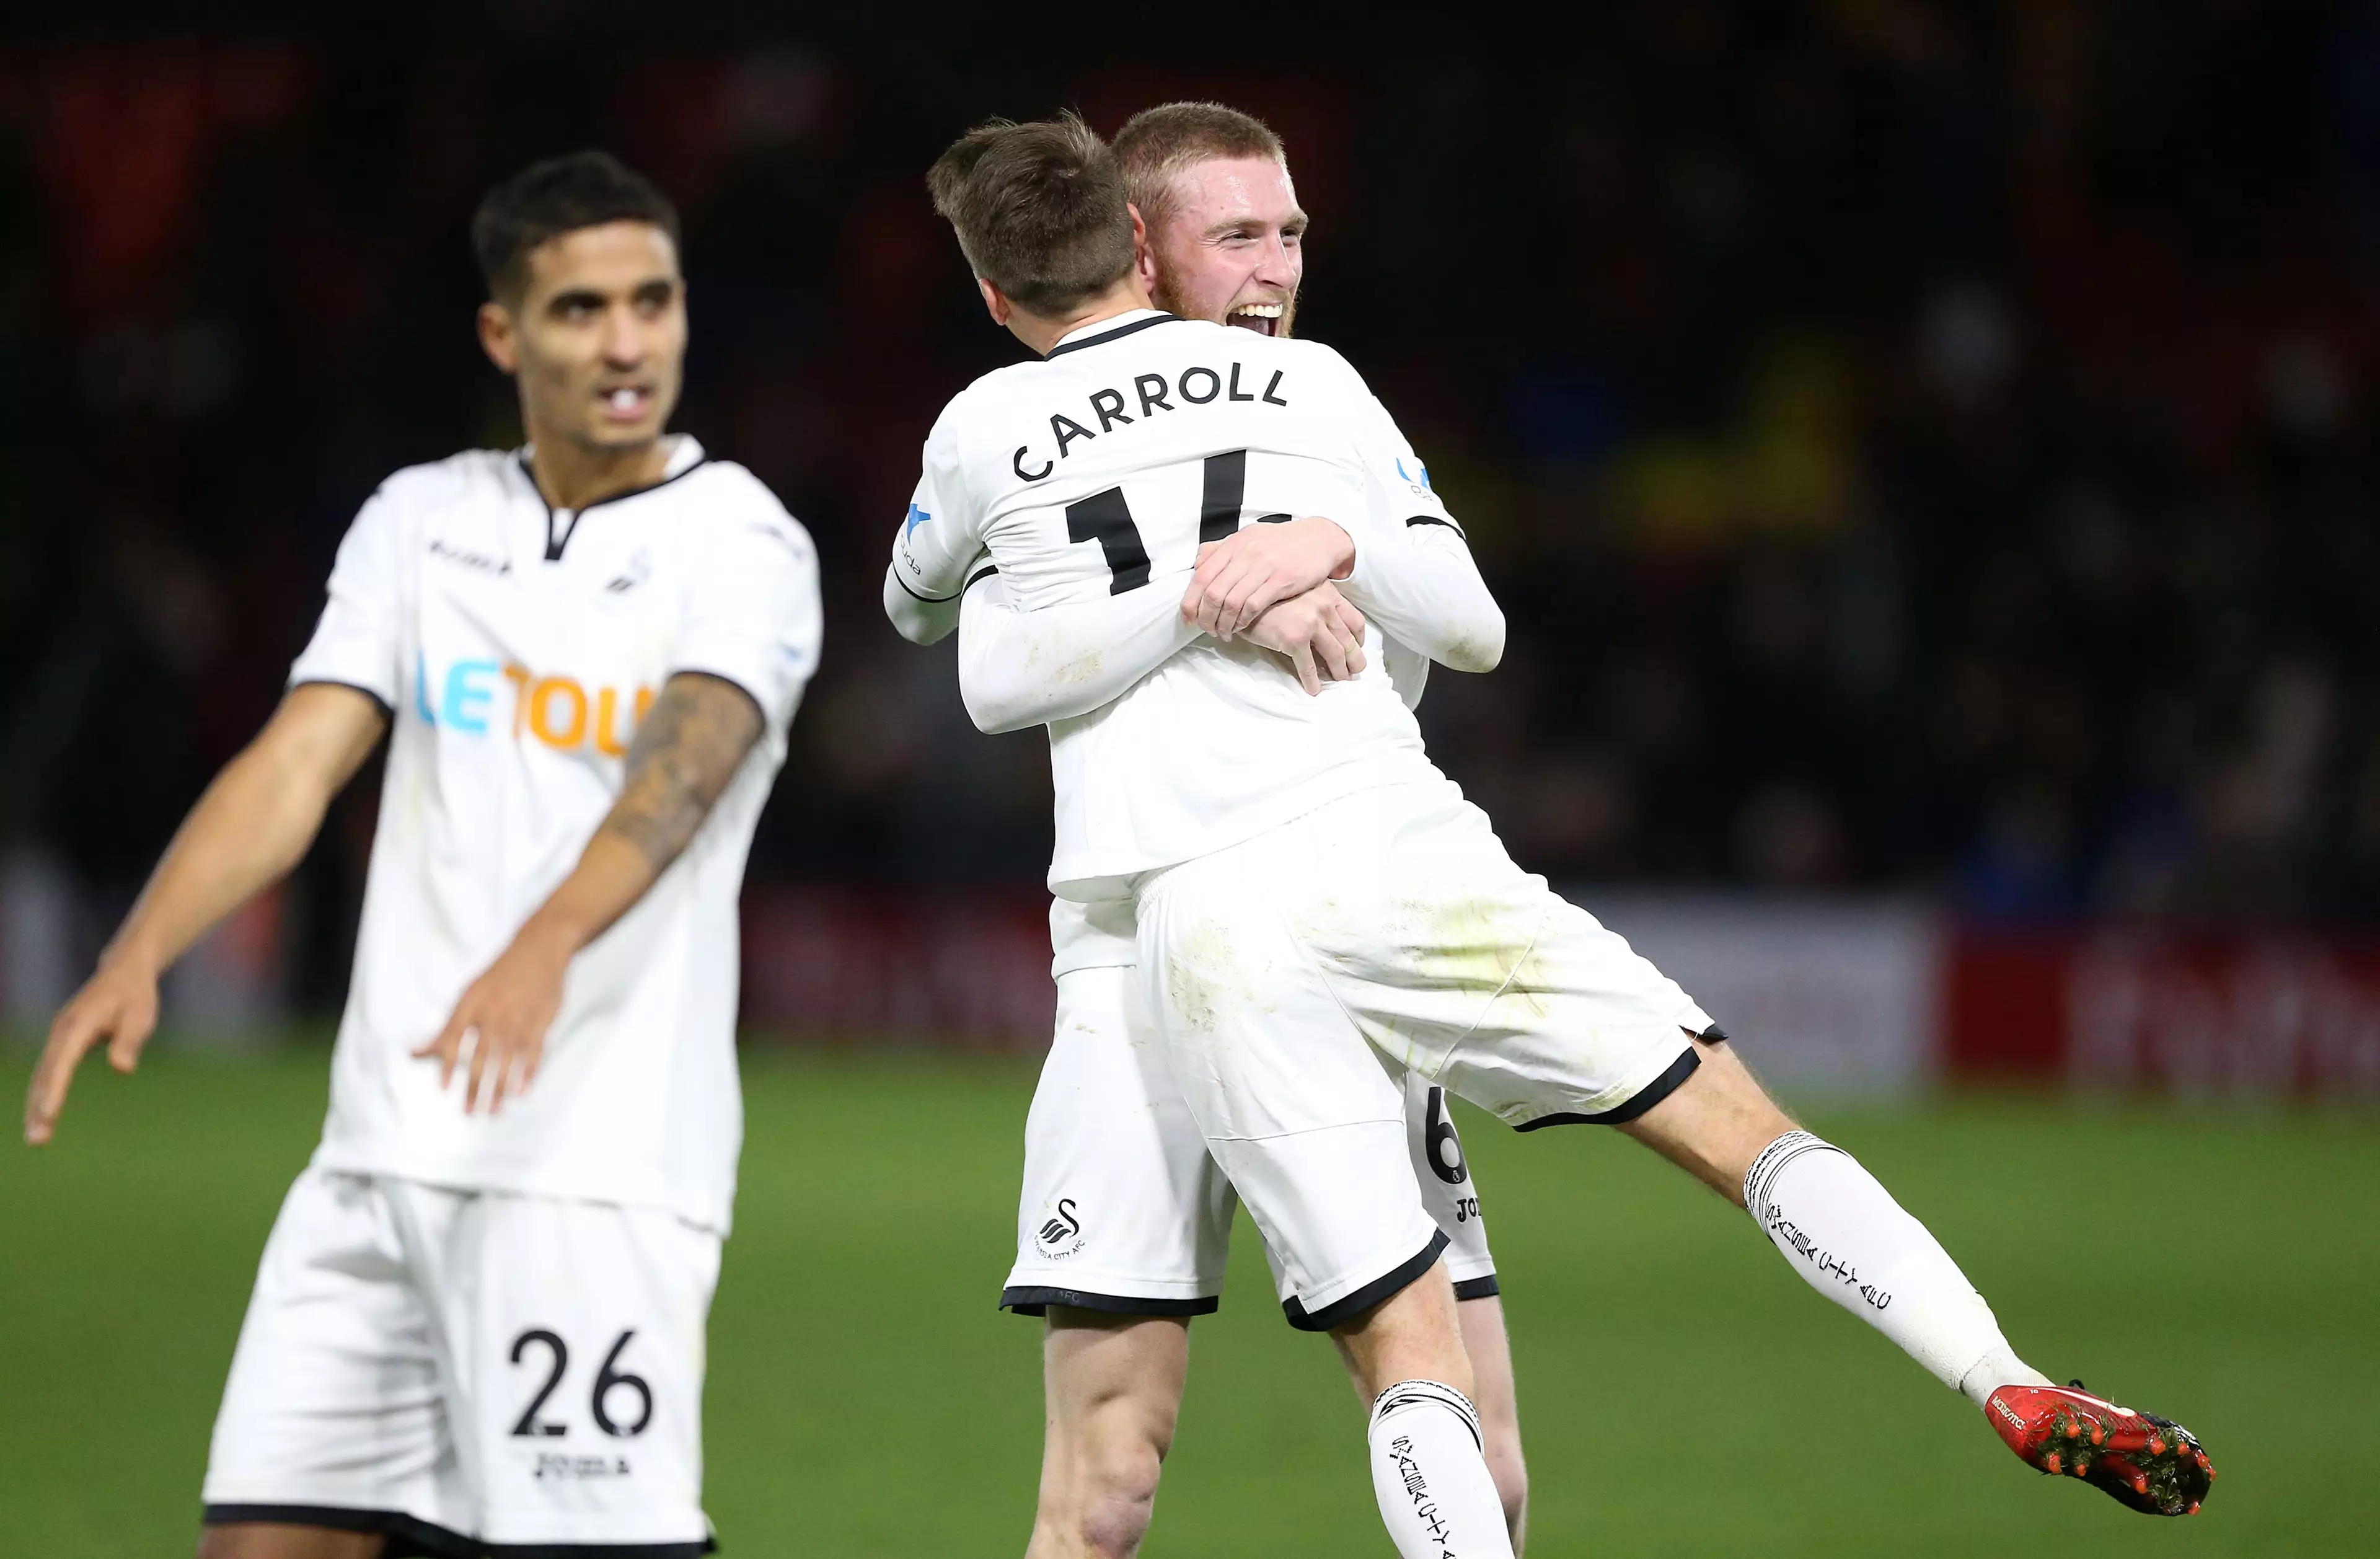 Swansea celebrate a rare win over Watford. Image: PA Images.